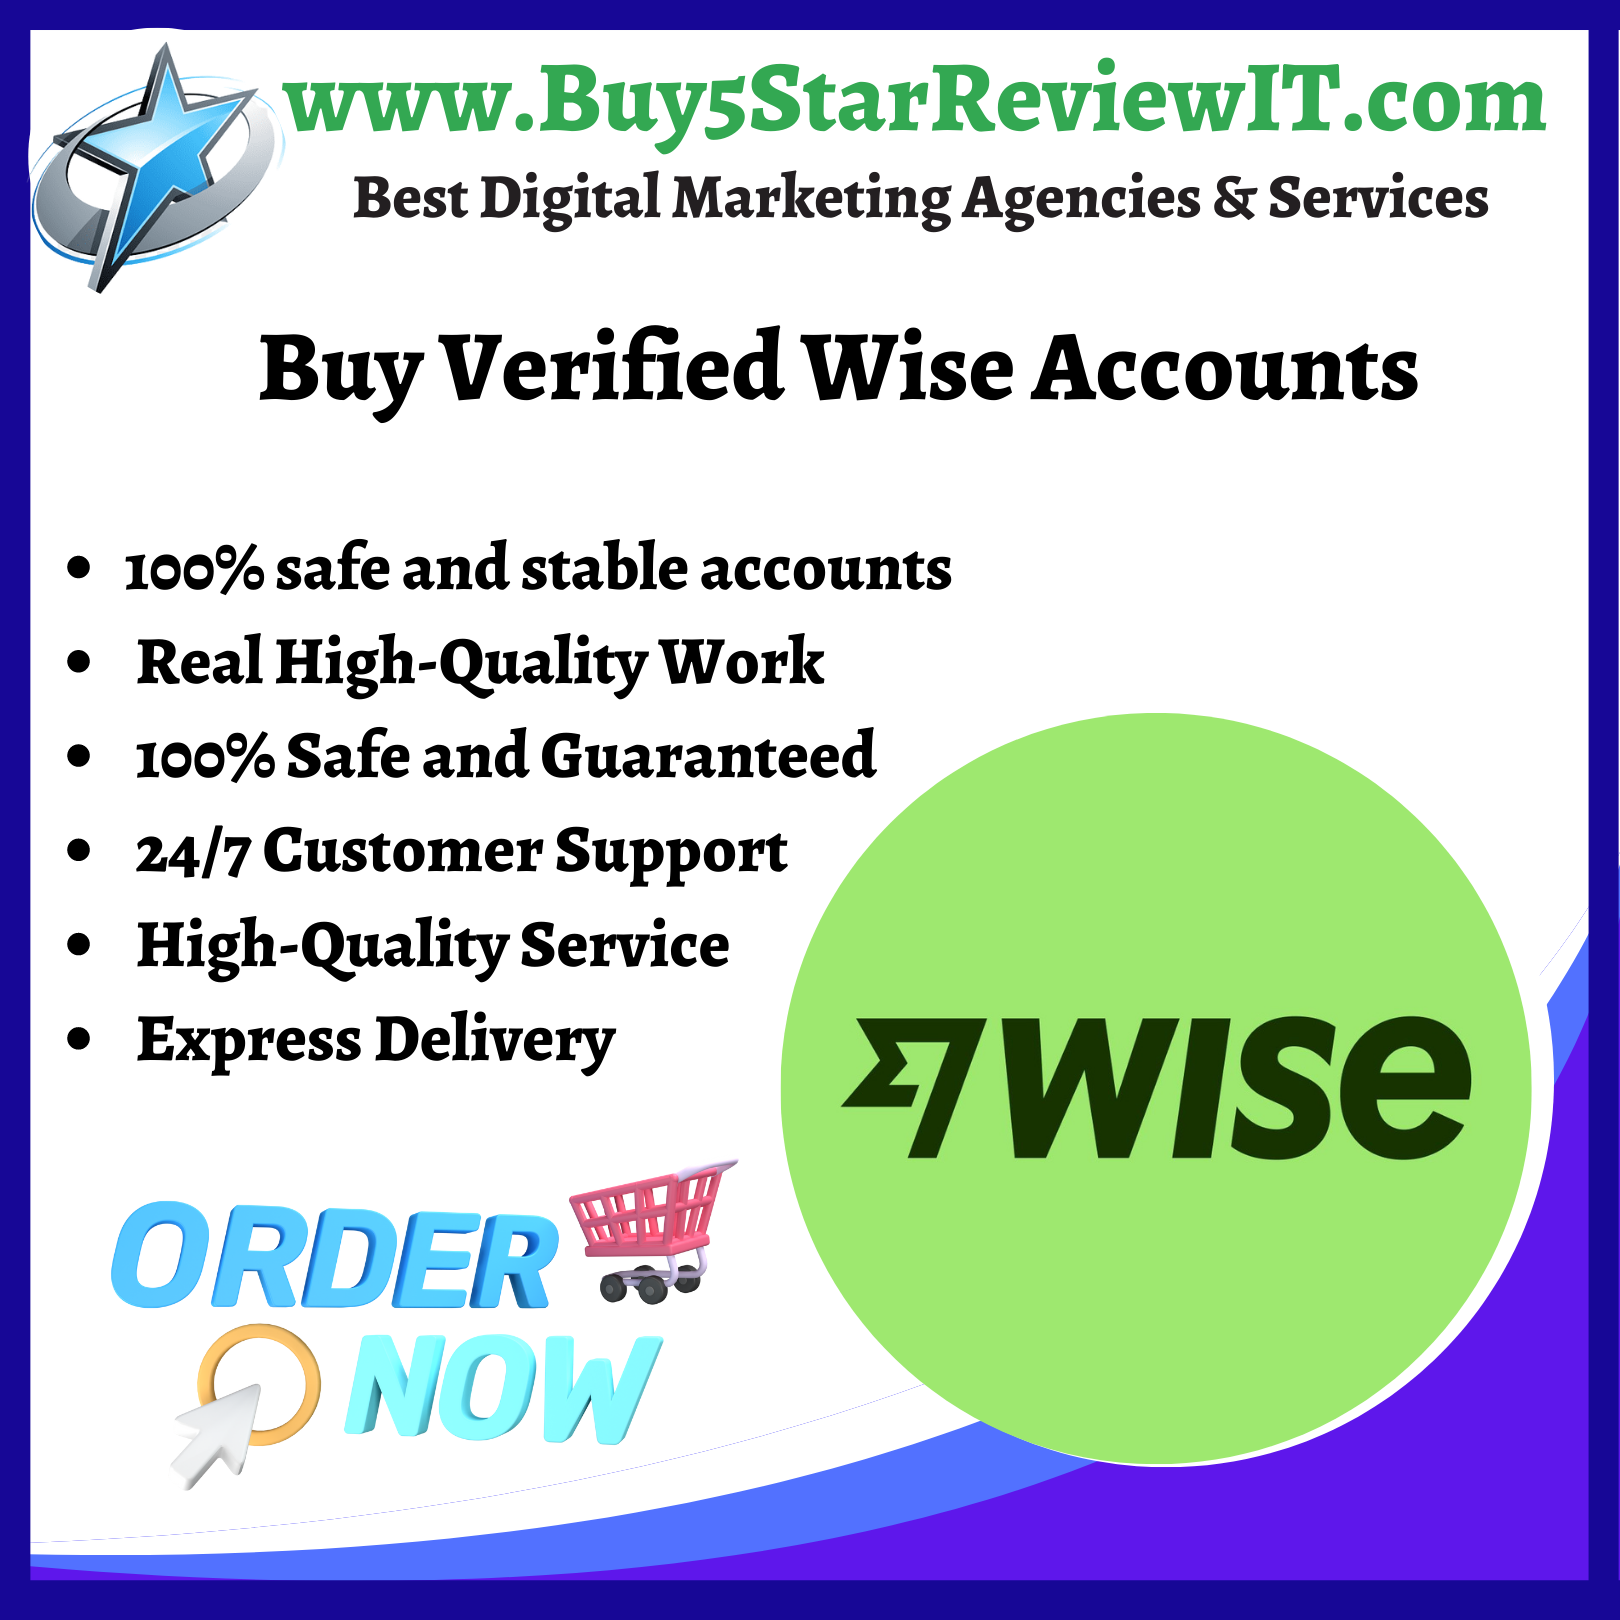 Buy Verified Wise Accounts - Buy 5 Star Review IT